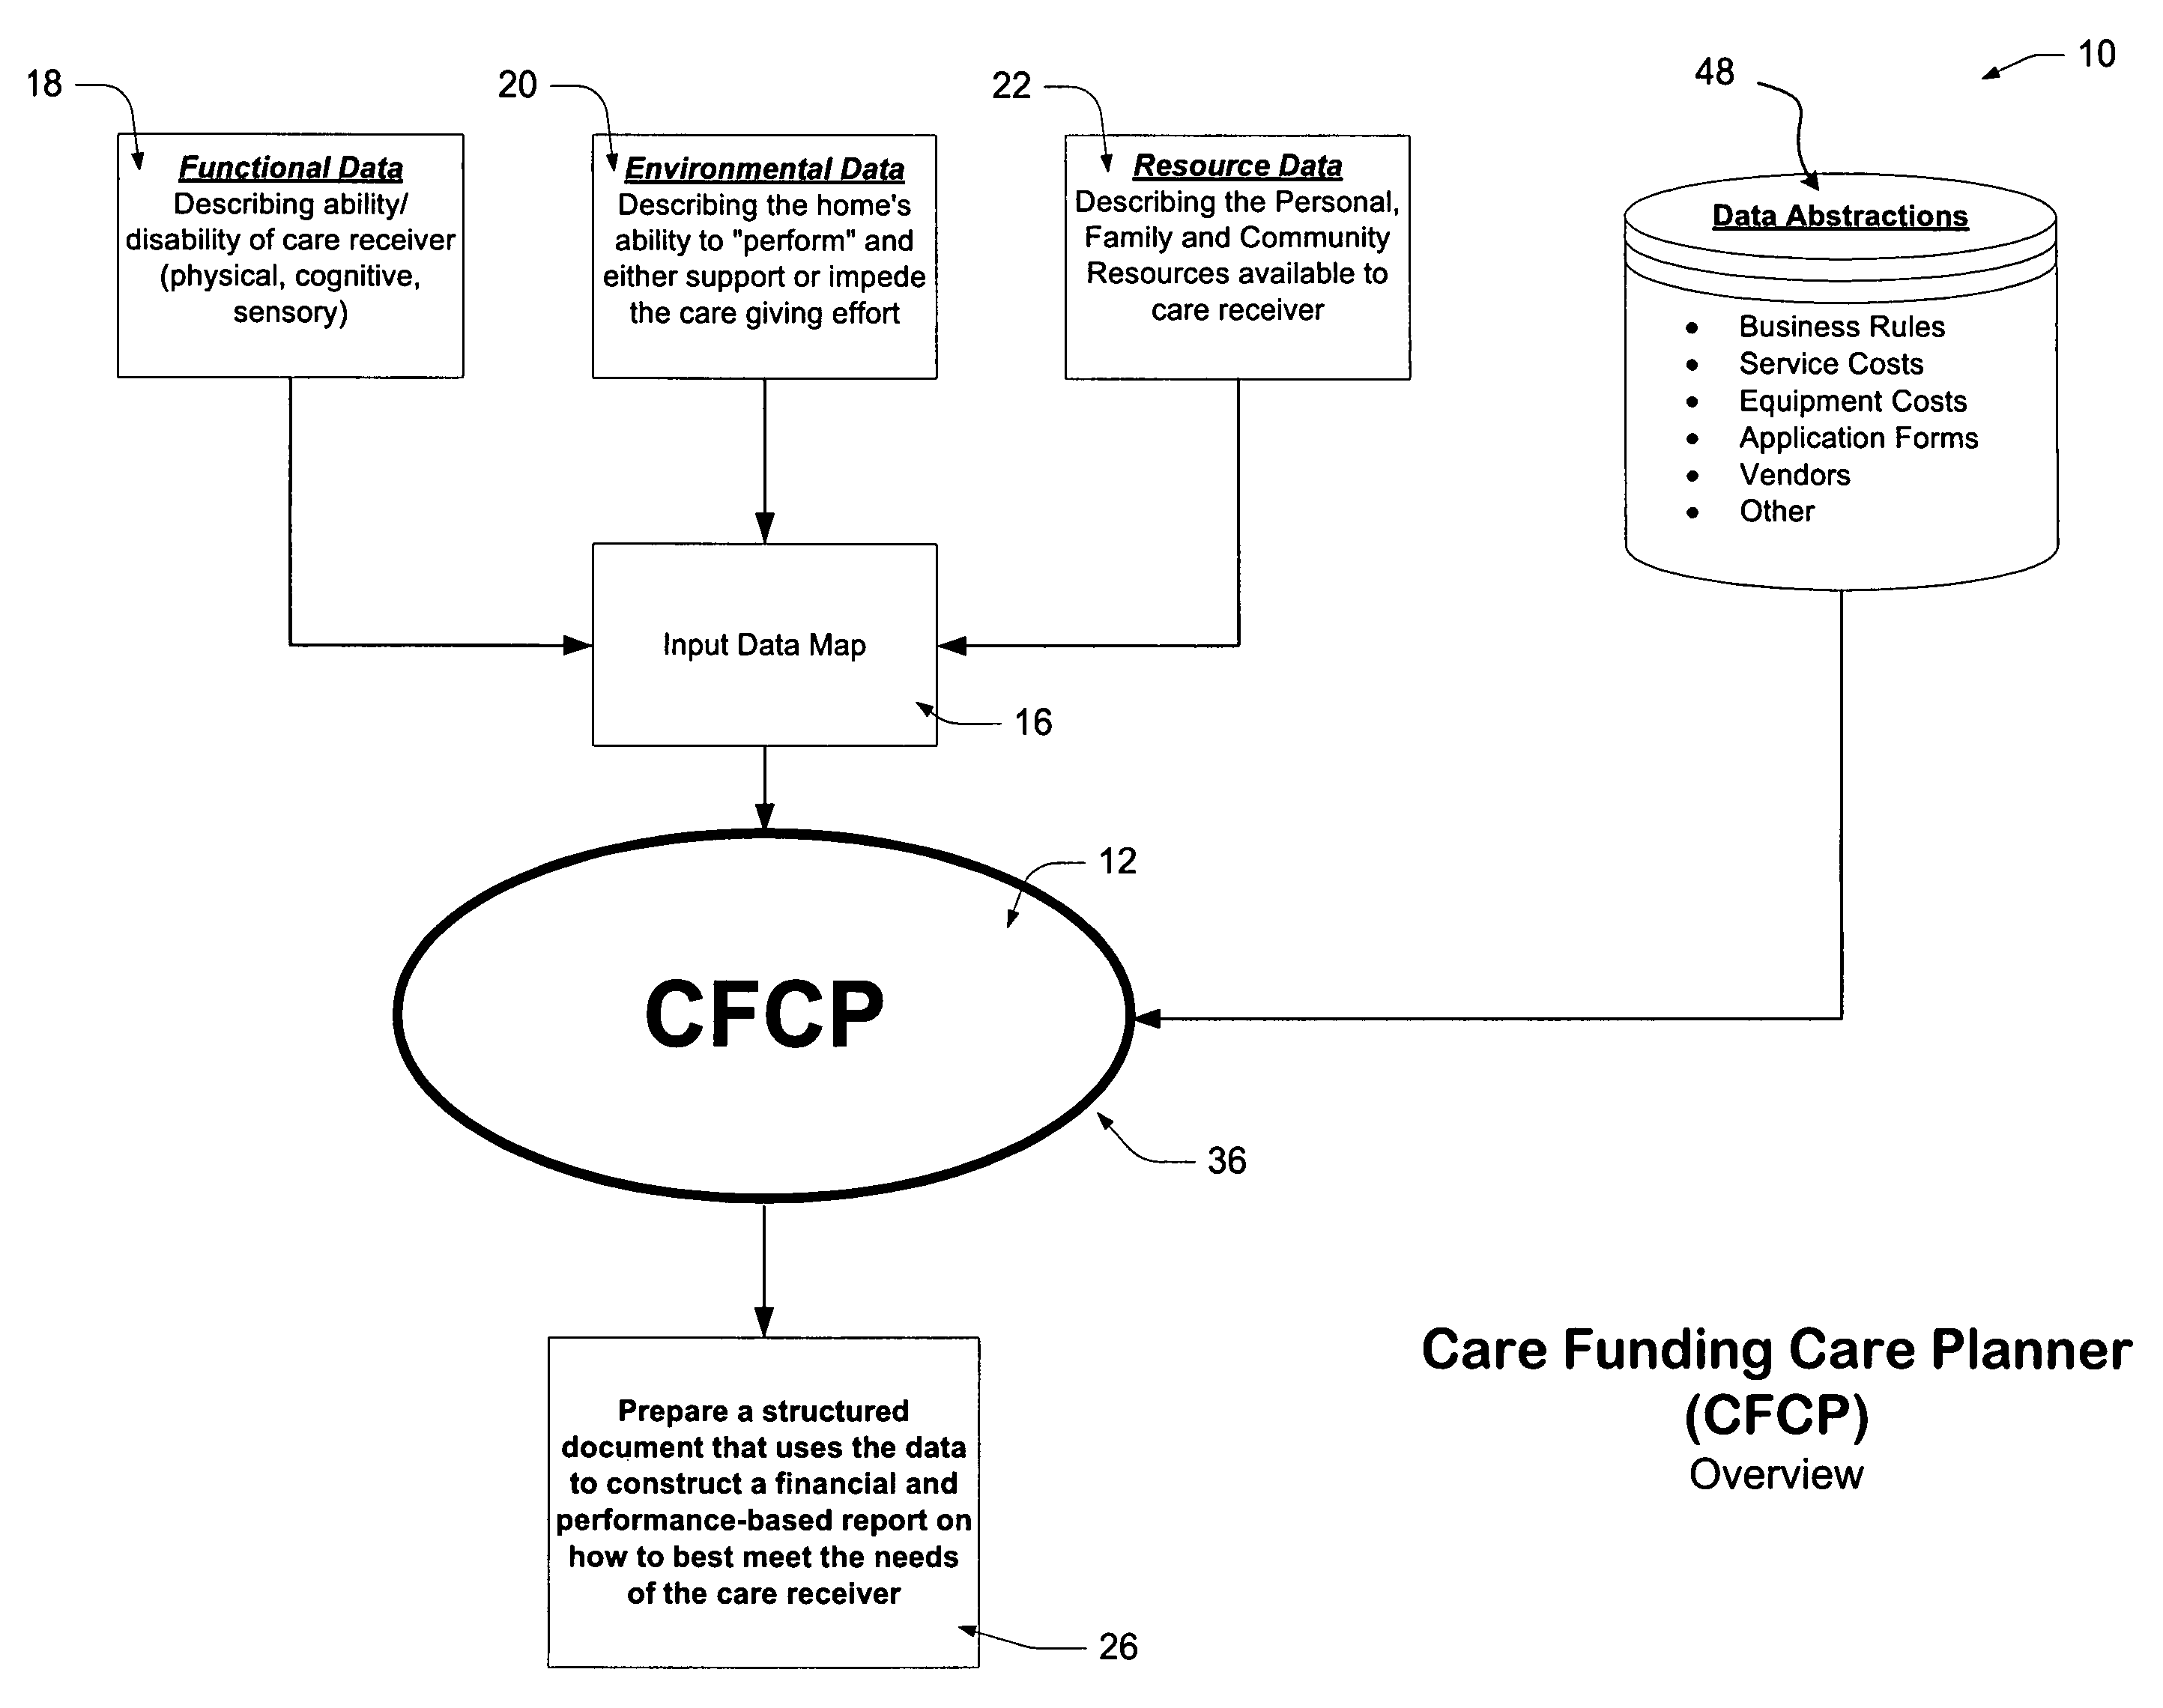 Care funding and care planning system